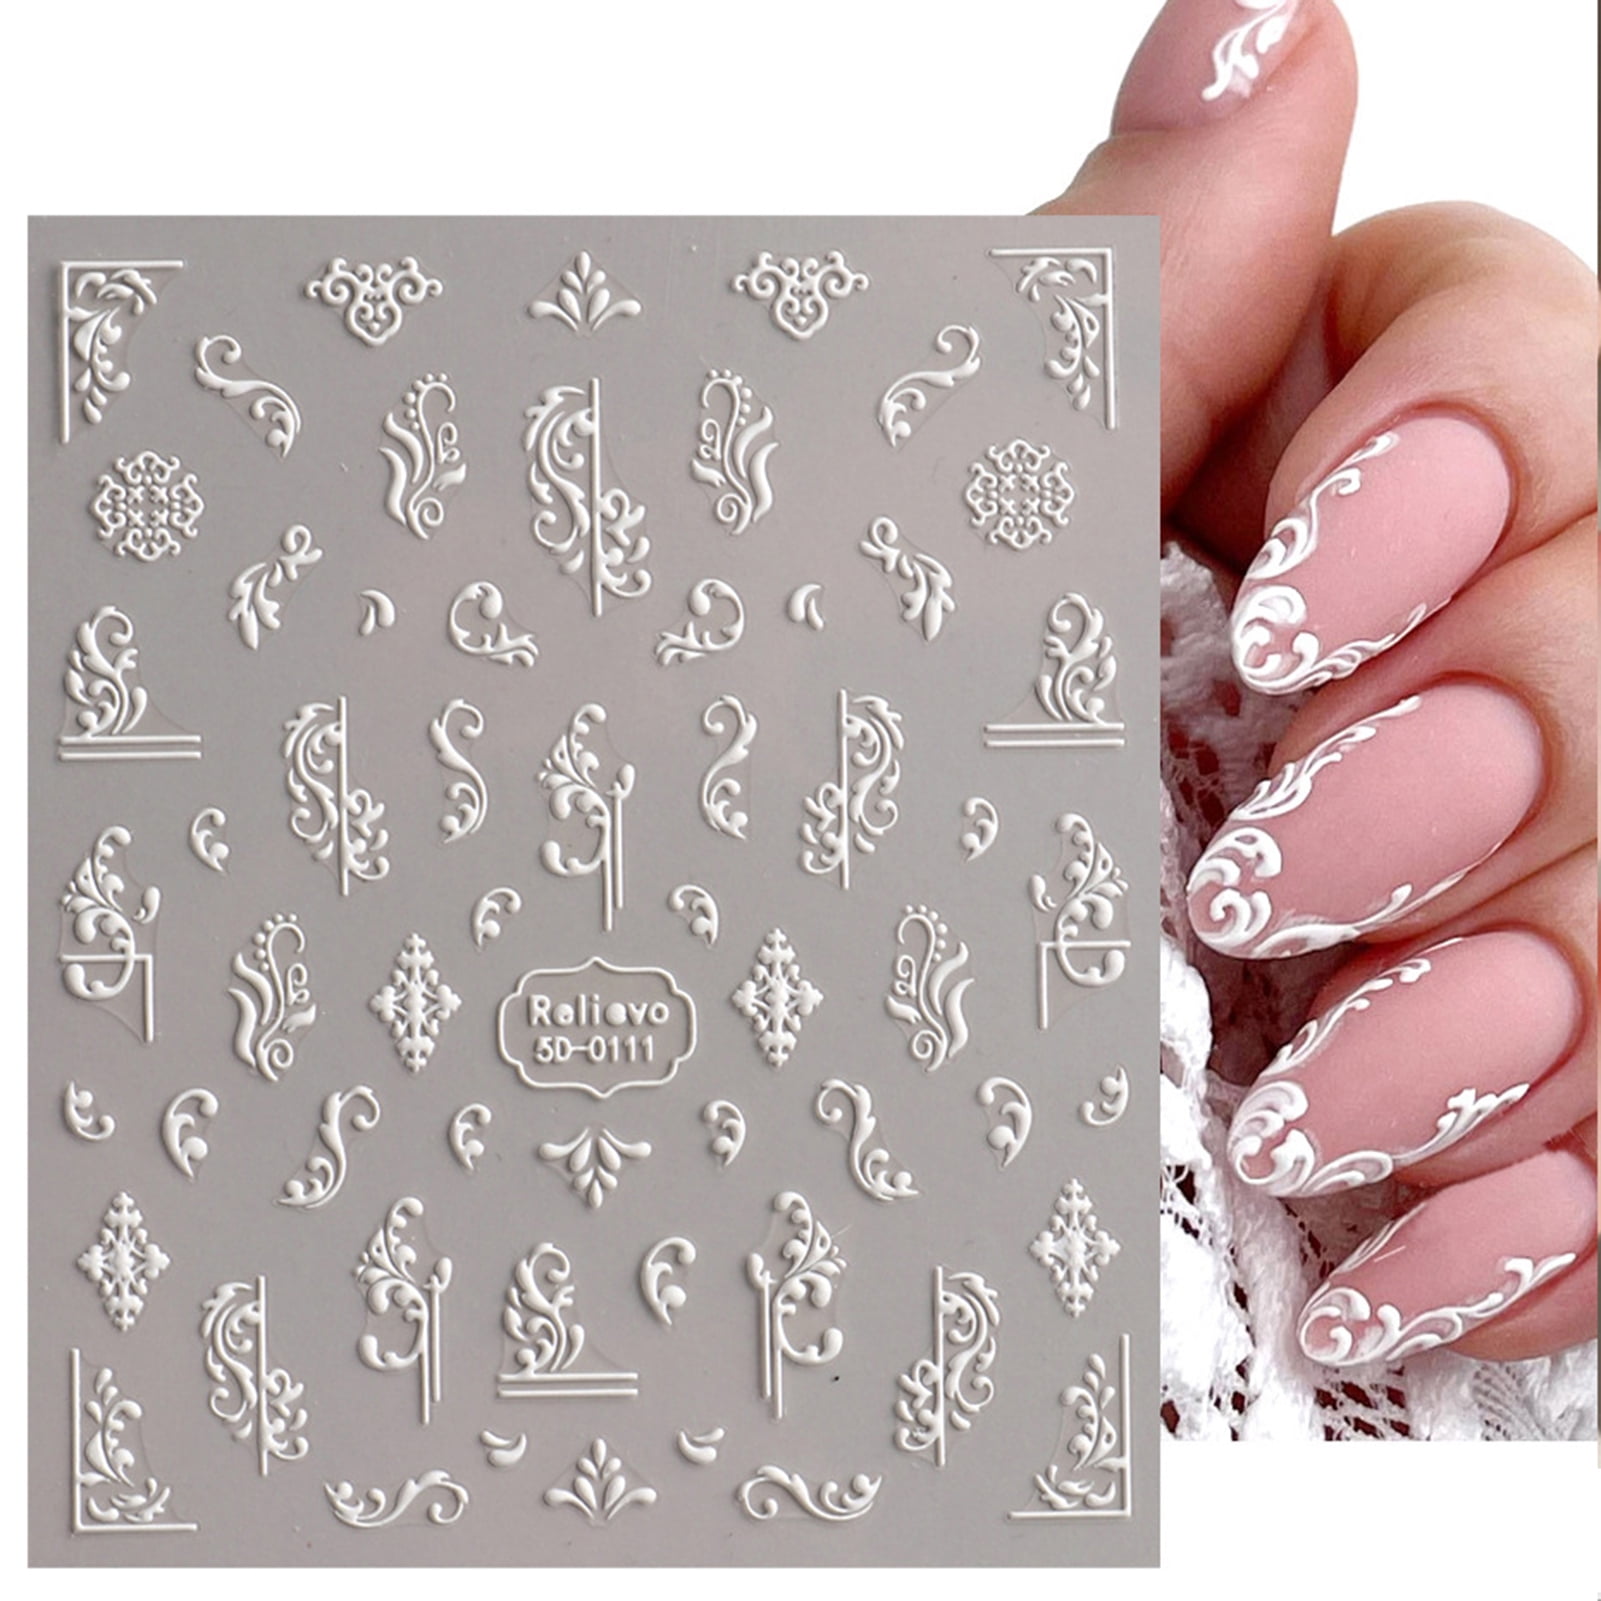  Grehge icker Decals Pink Nail Decals 3D Self-Adhesive